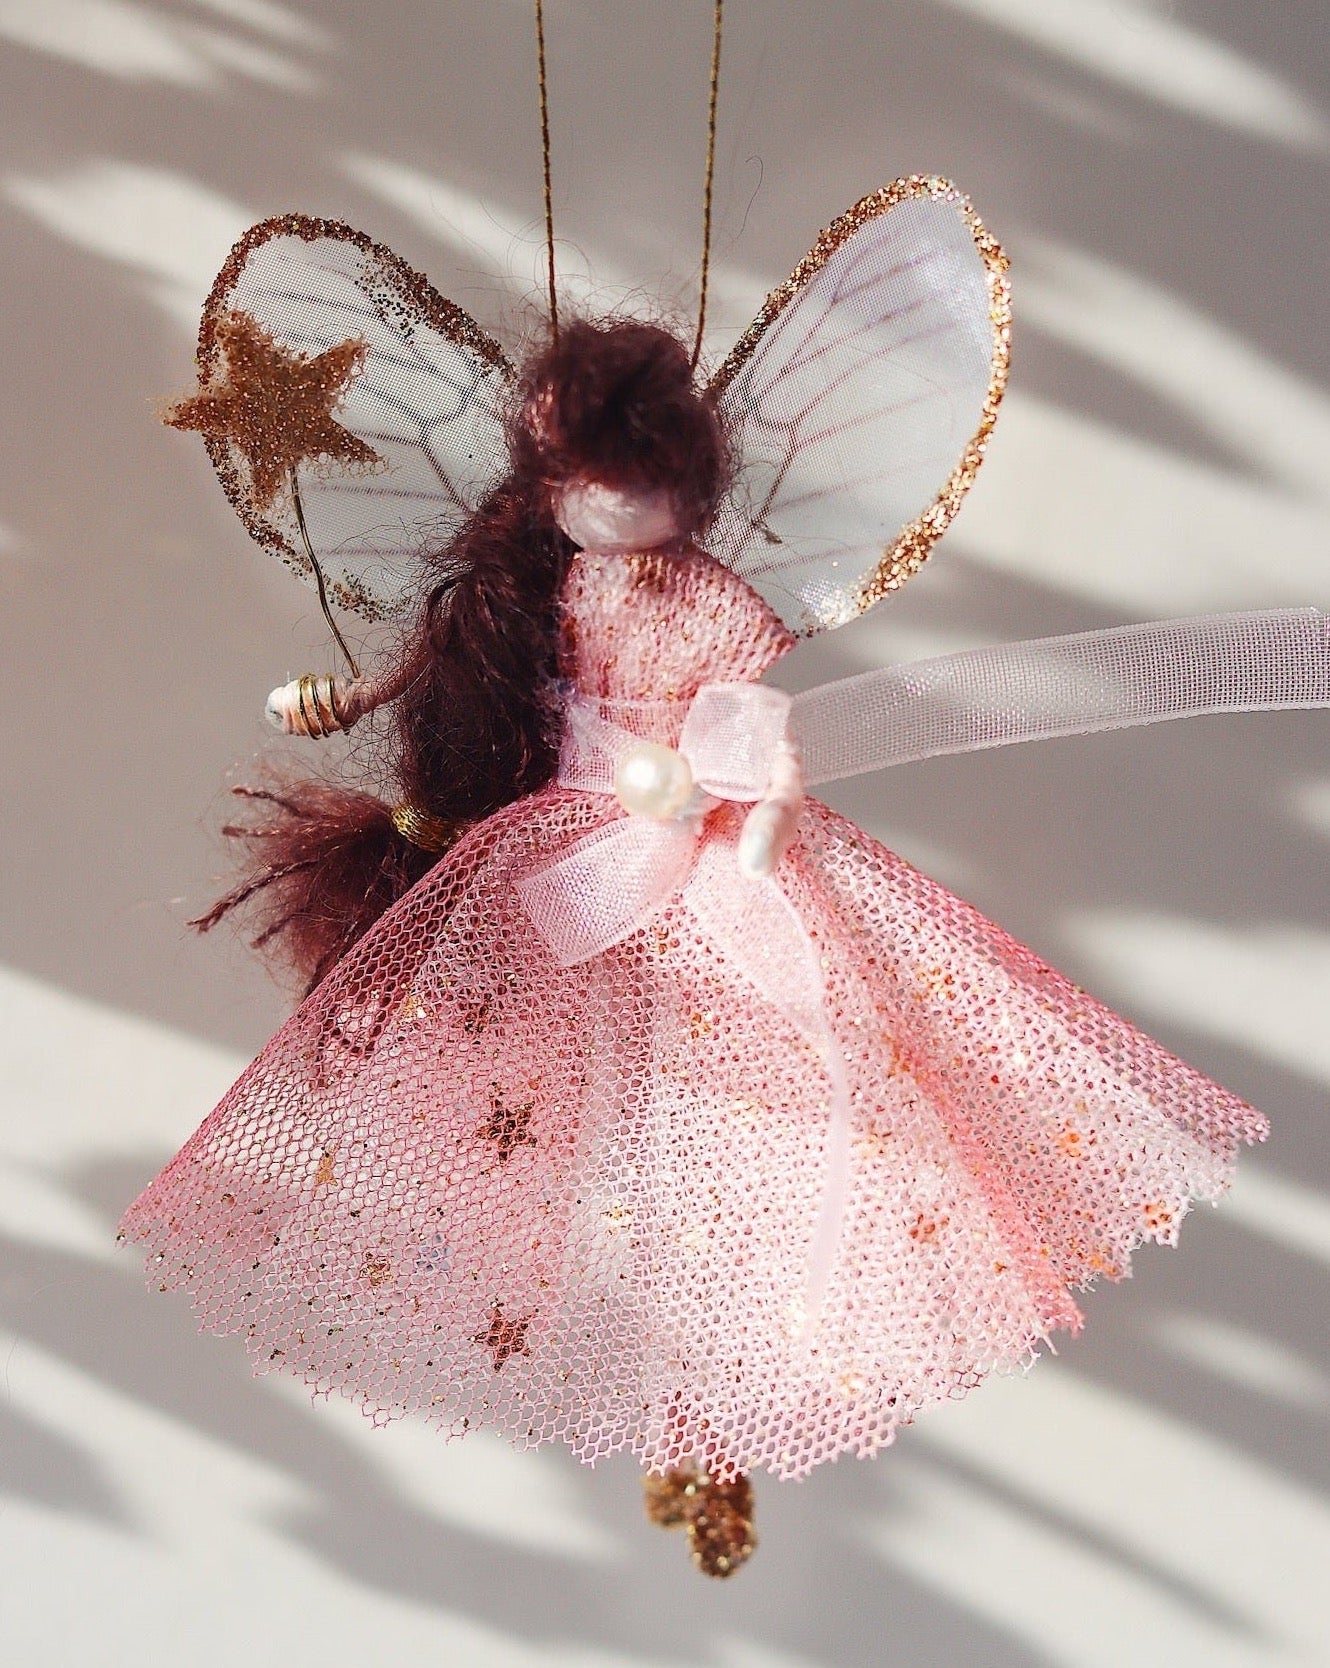 This little fairy is dressed in a pink glitter tulle with a gold star underskirt. She has sashed her gown at the waist with a pink Organza ribbon and a pearl tooth trim. She has little shoes dipped in glitter and her glittered wand to grant you your wishes!]